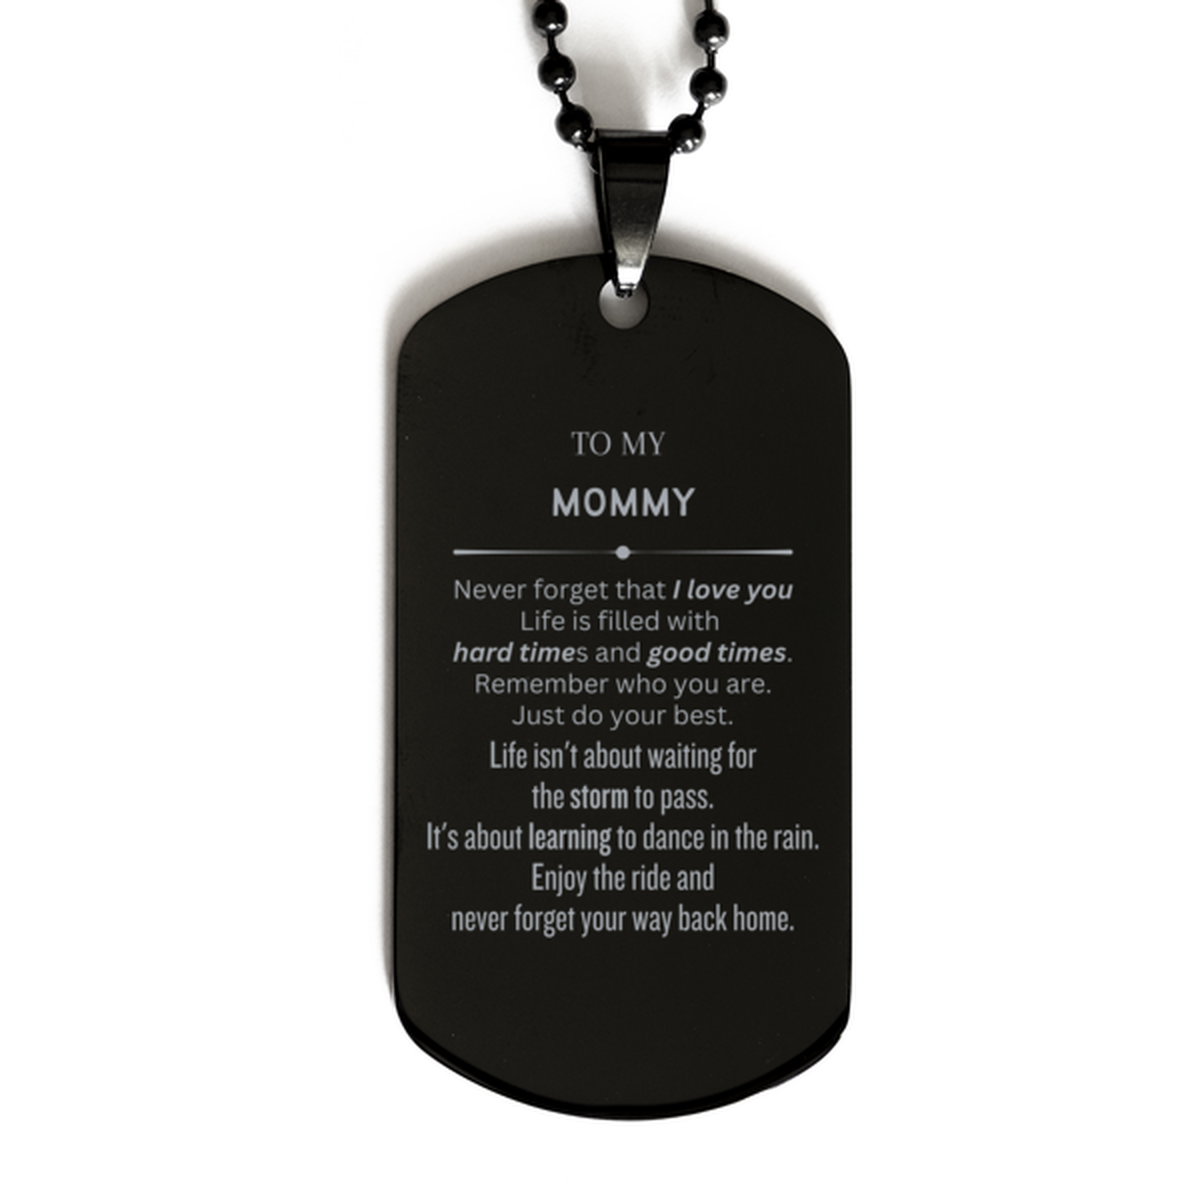 Christmas Mommy Black Dog Tag Gifts, To My Mommy Birthday Thank You Gifts For Mommy, Graduation Unique Gifts For Mommy To My Mommy Never forget that I love you life is filled with hard times and good times. Remember who you are. Just do your best